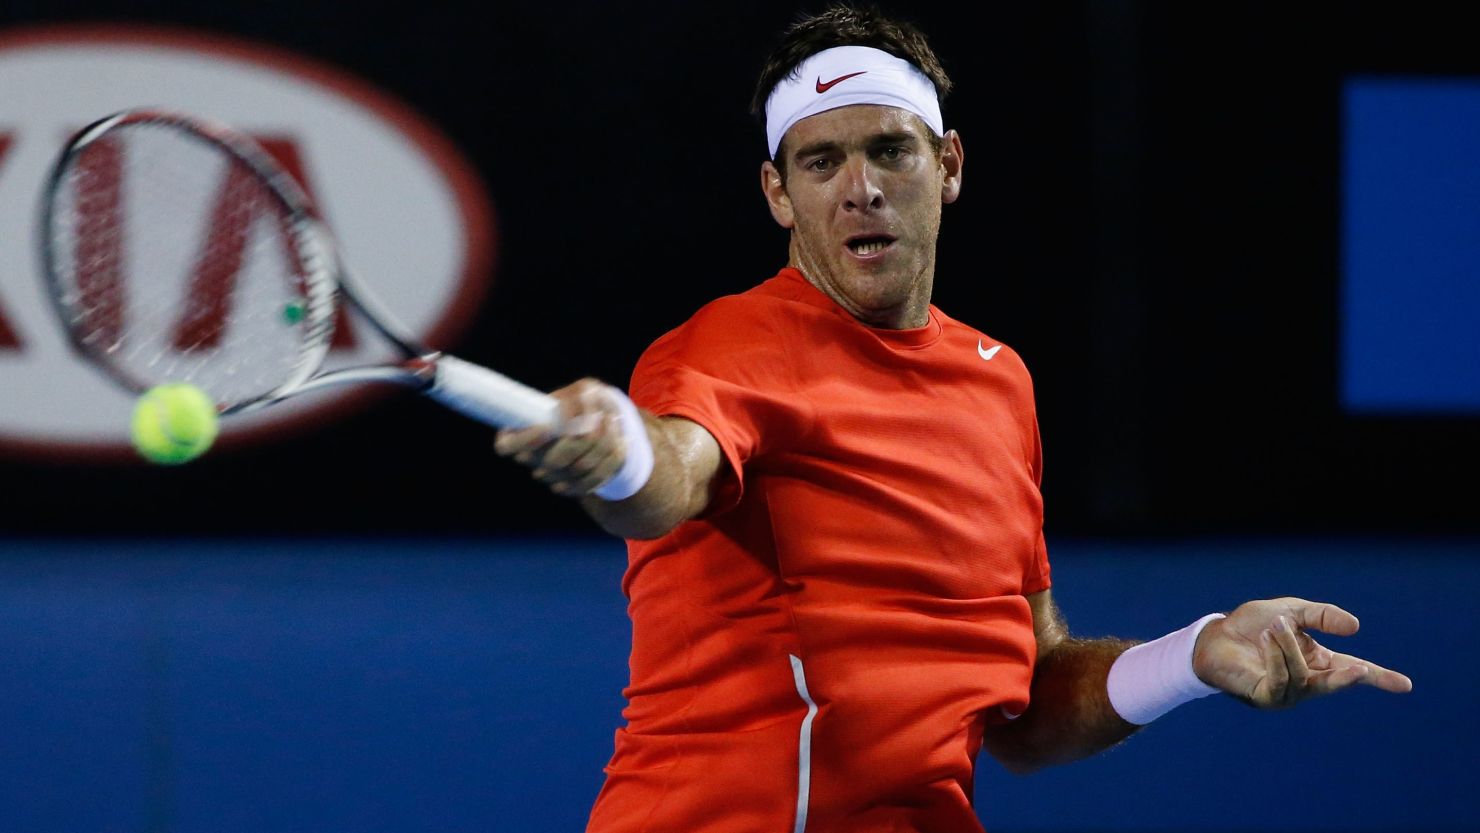 Fifth seed Juan Martin del Potro was knocked out of the second round at the Australian Open by Spain's Roberto Bautista Agut. 